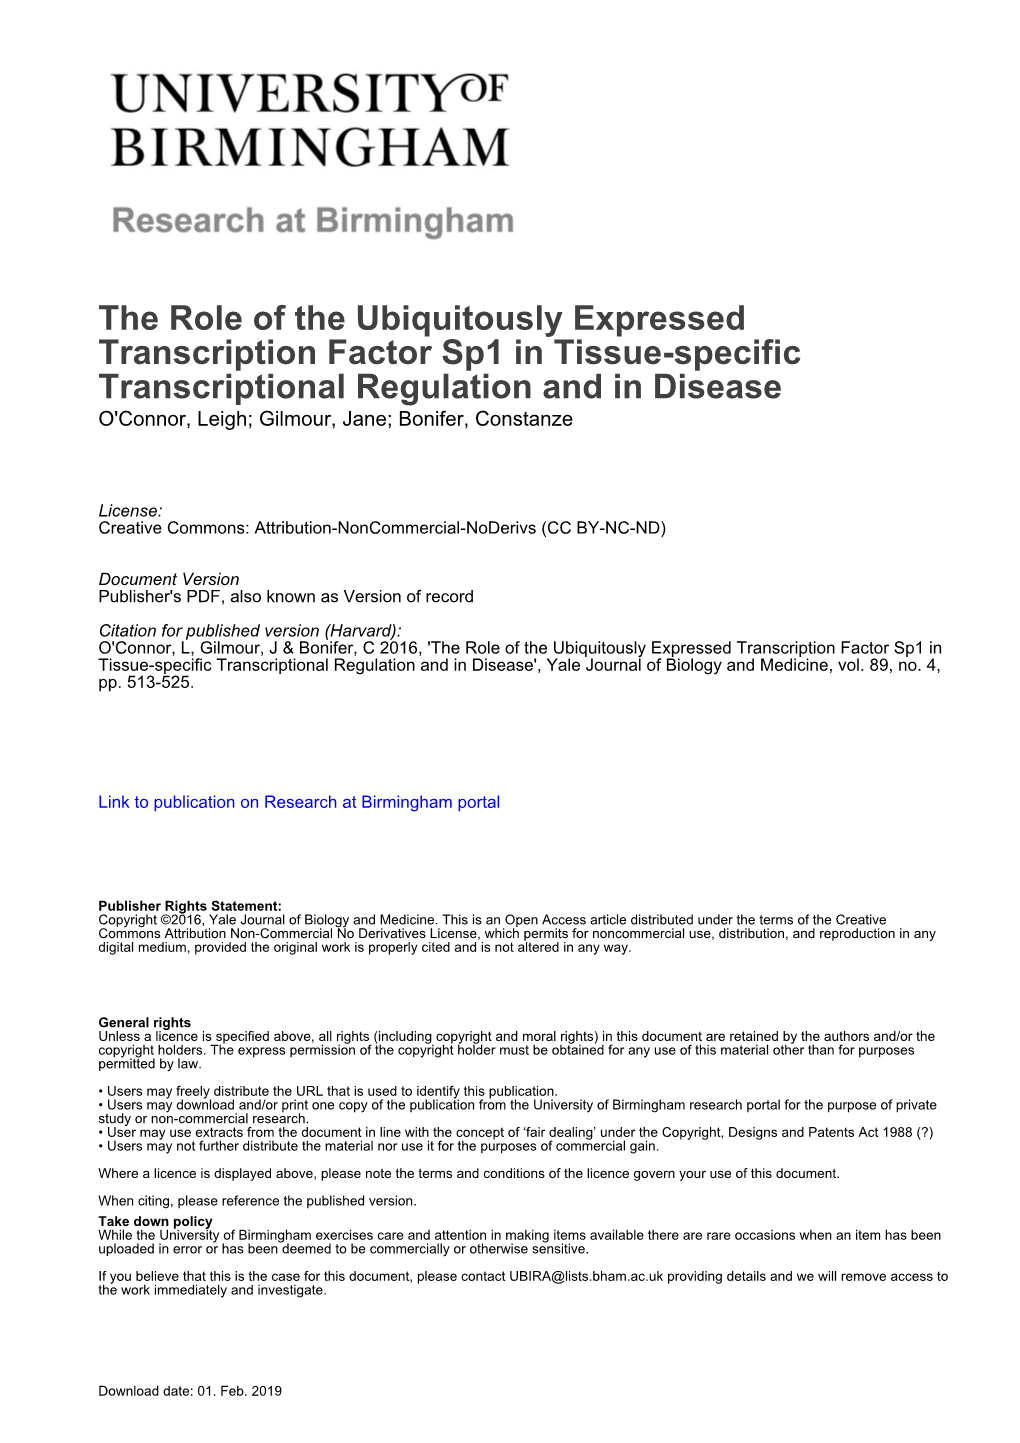 The Role of the Ubiquitously Expressed Transcription